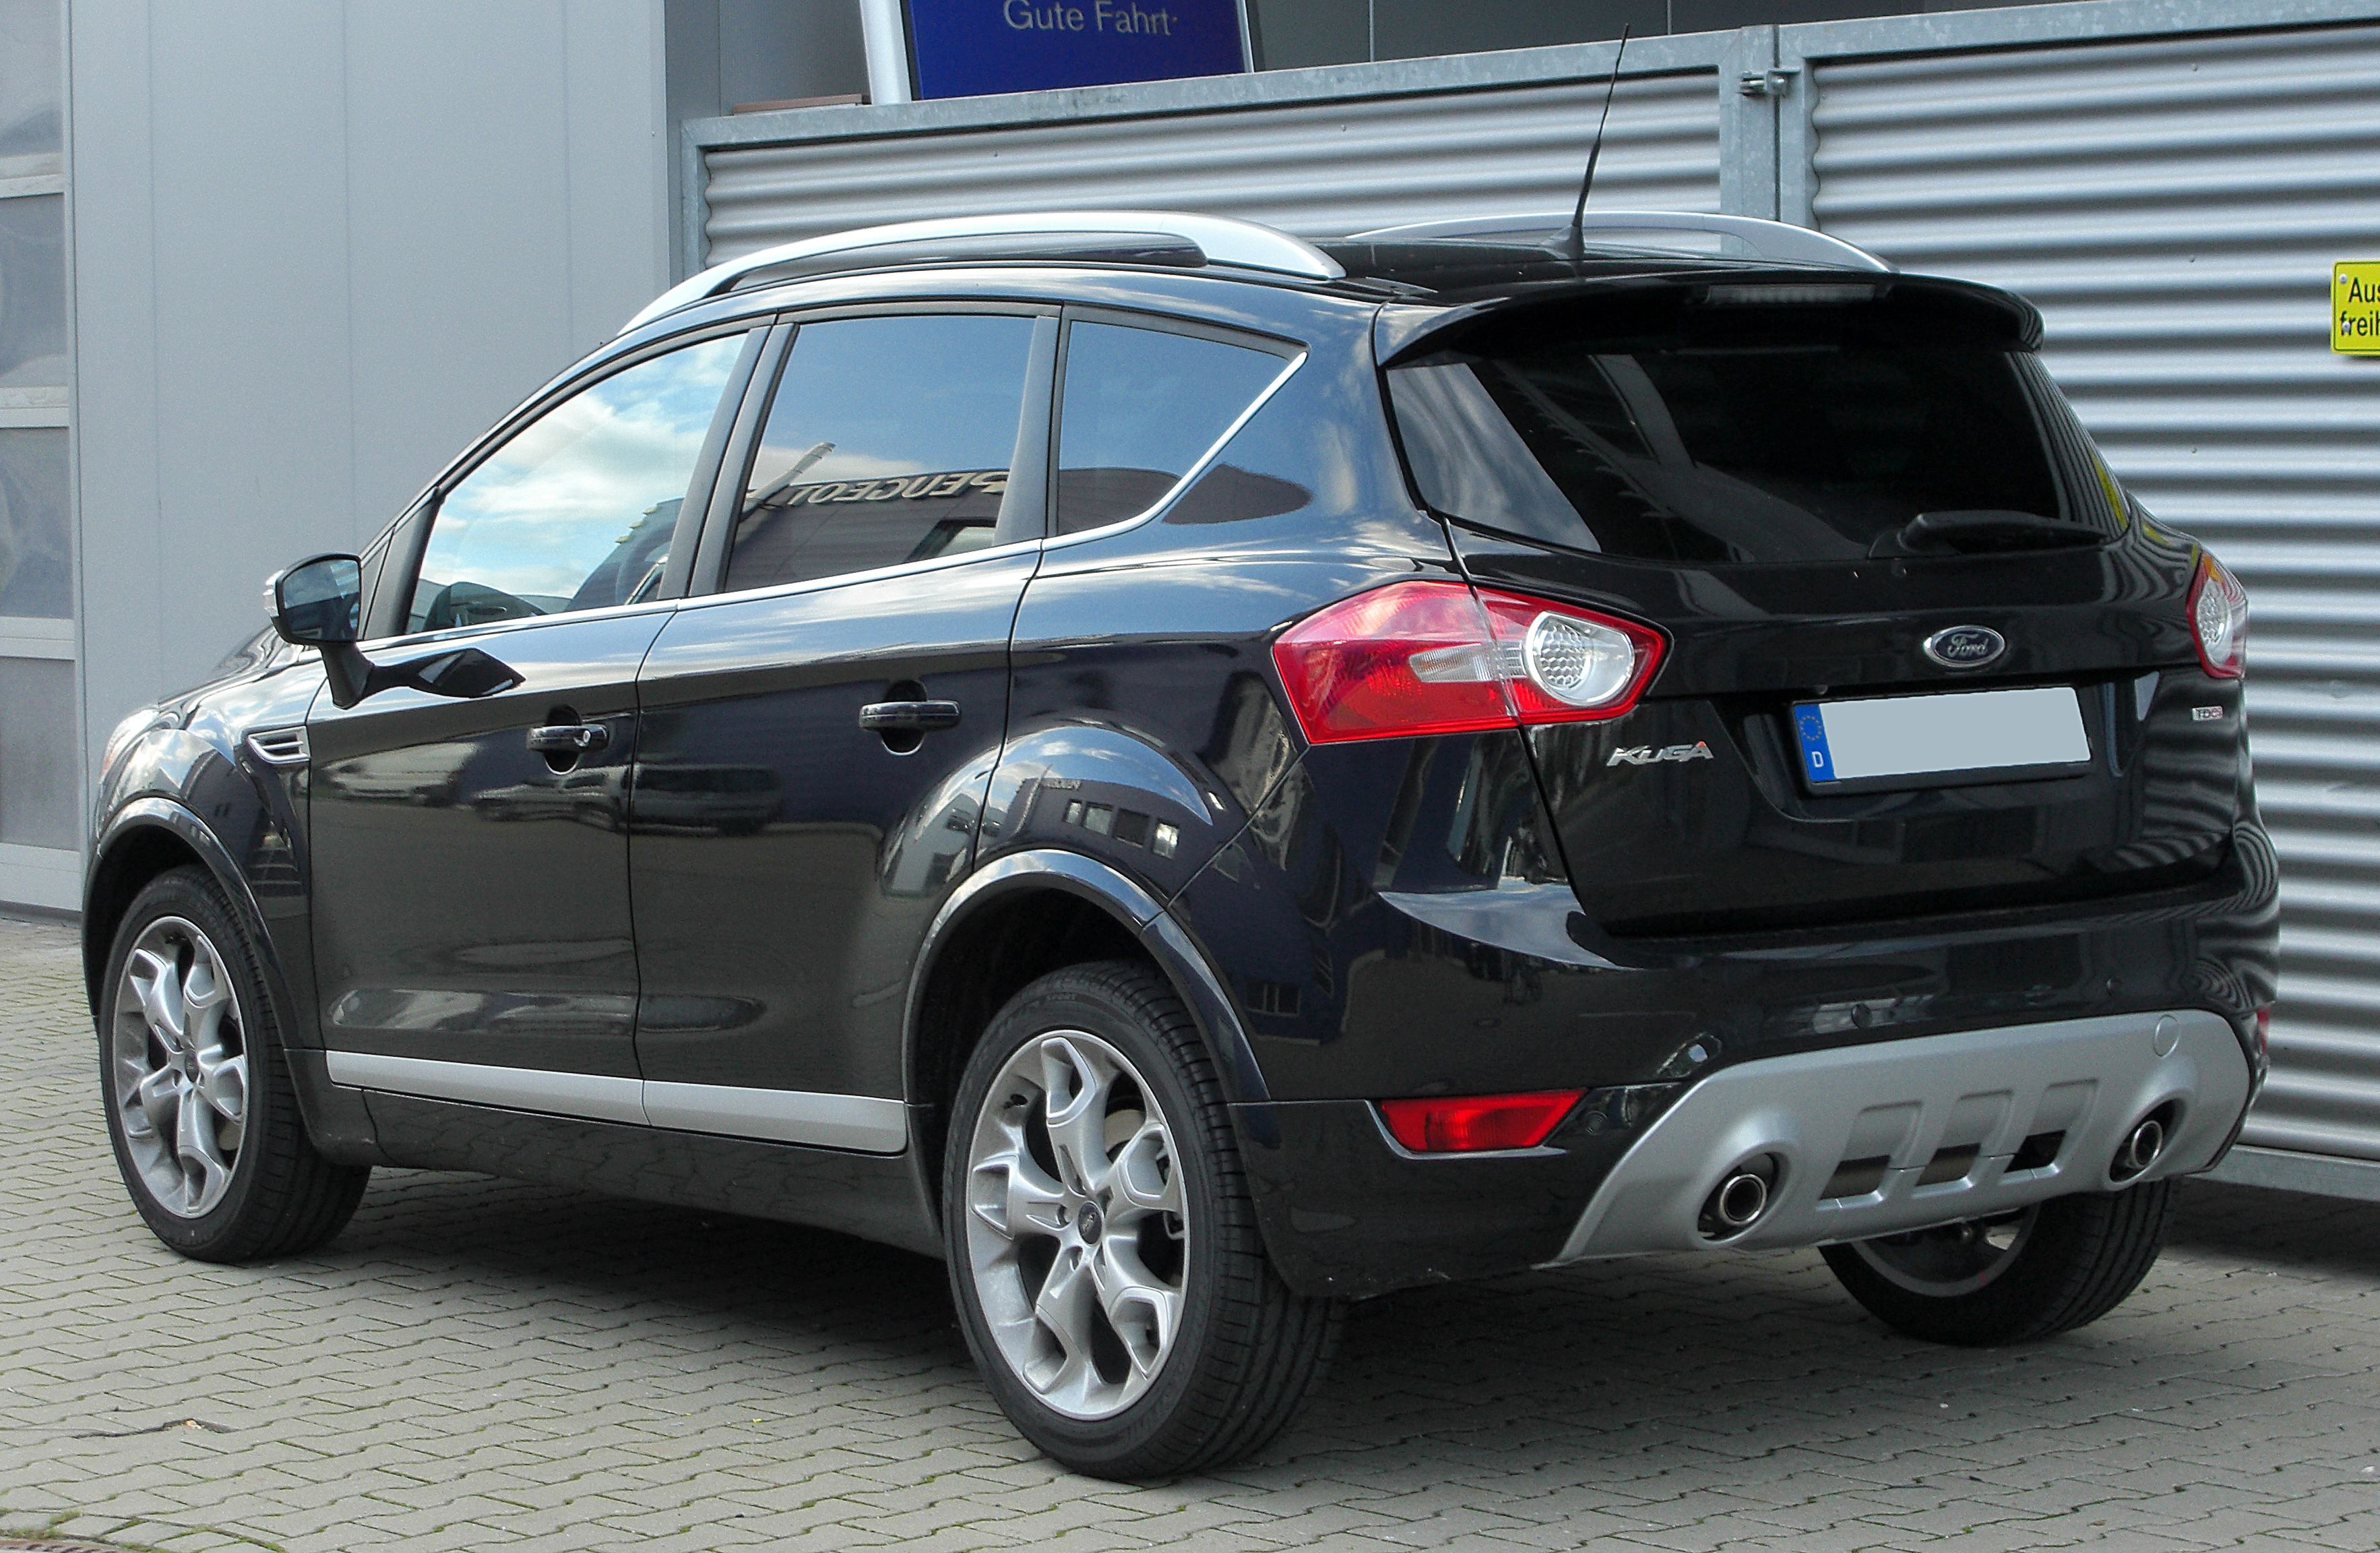 Ford Kuga 2.0 TDCi technical details, history, photos on